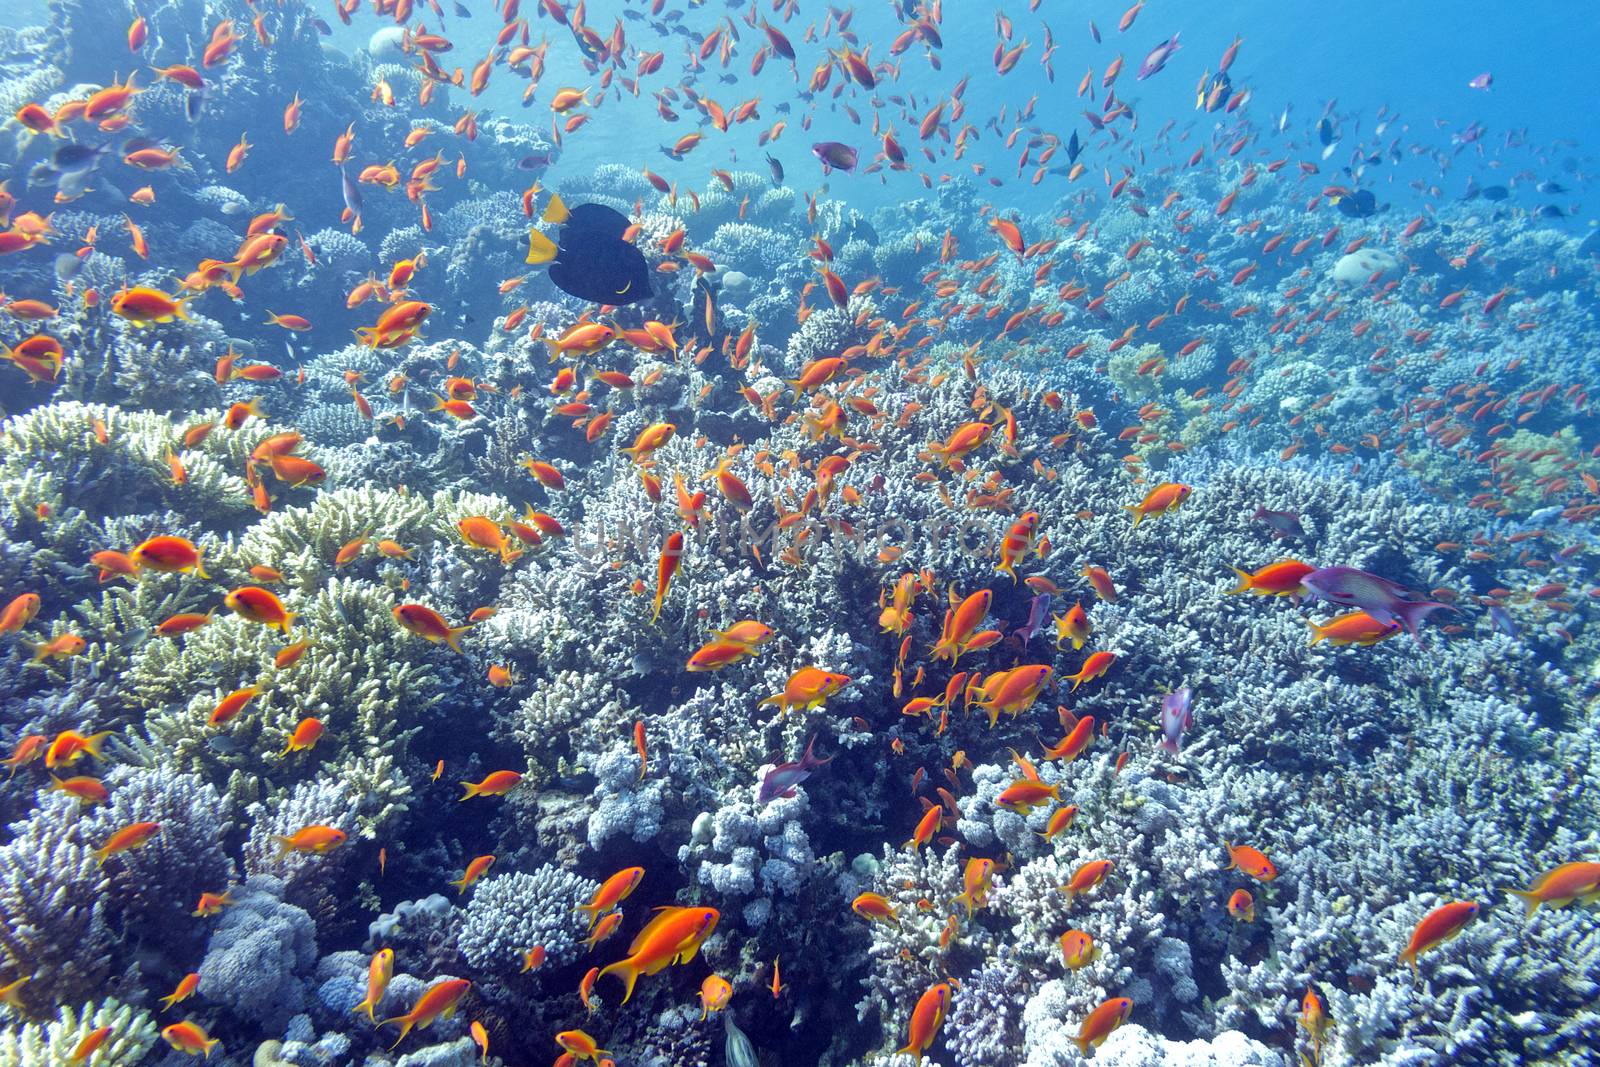  coral reef with shoal of fishes scalefin anthias, underwater by mychadre77